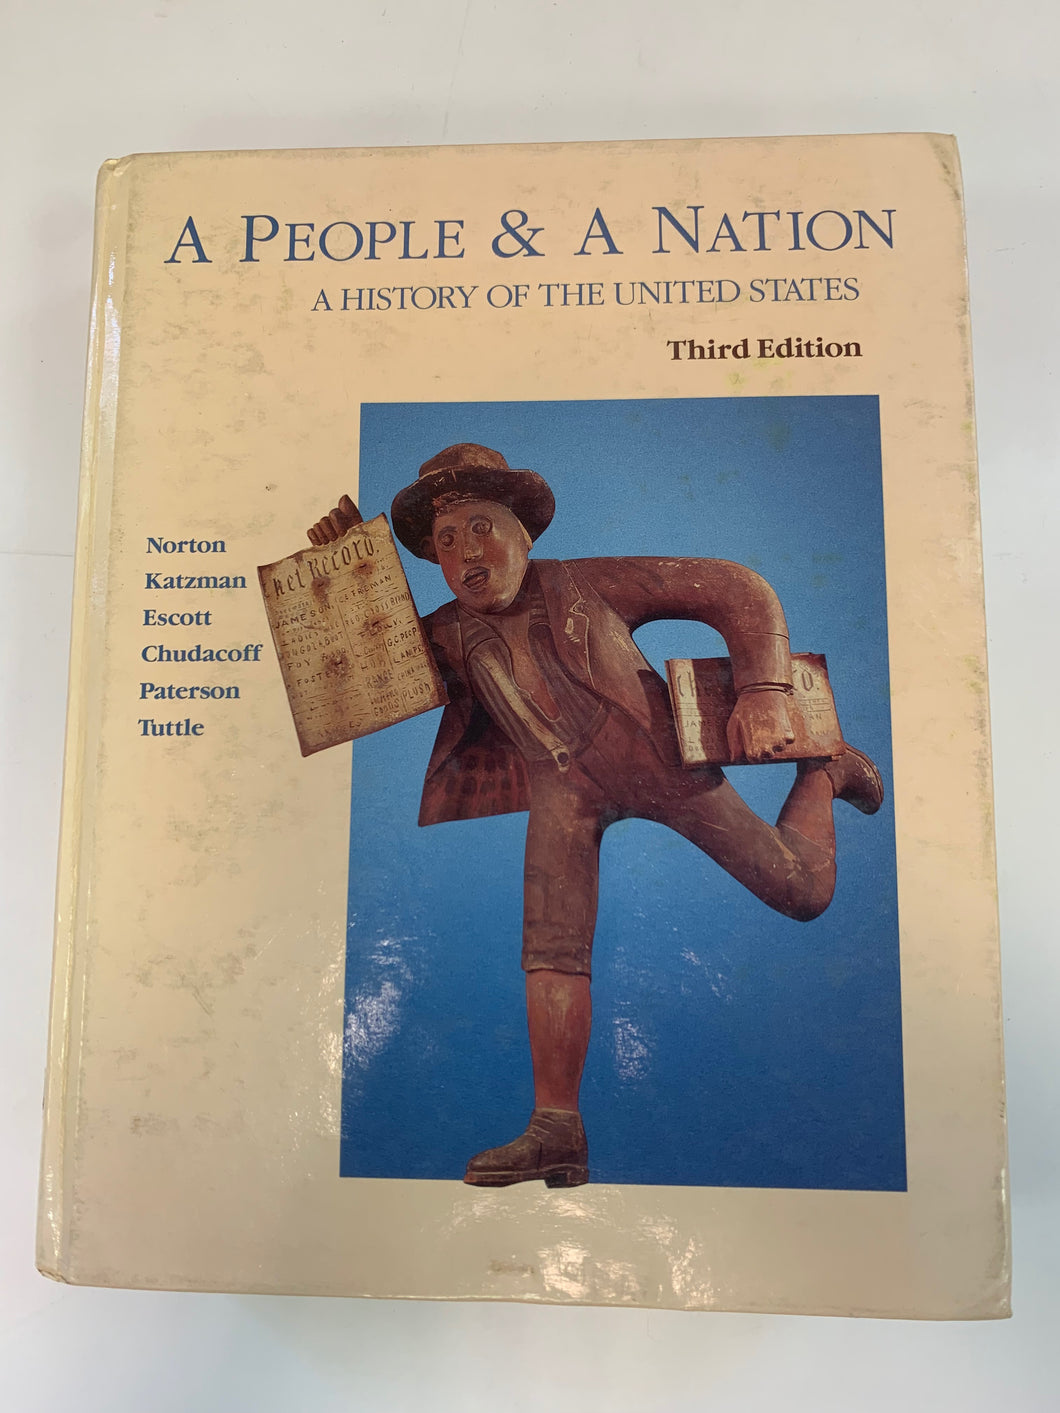 A People & A Nation: A History of the United States by Mary Beth Norton